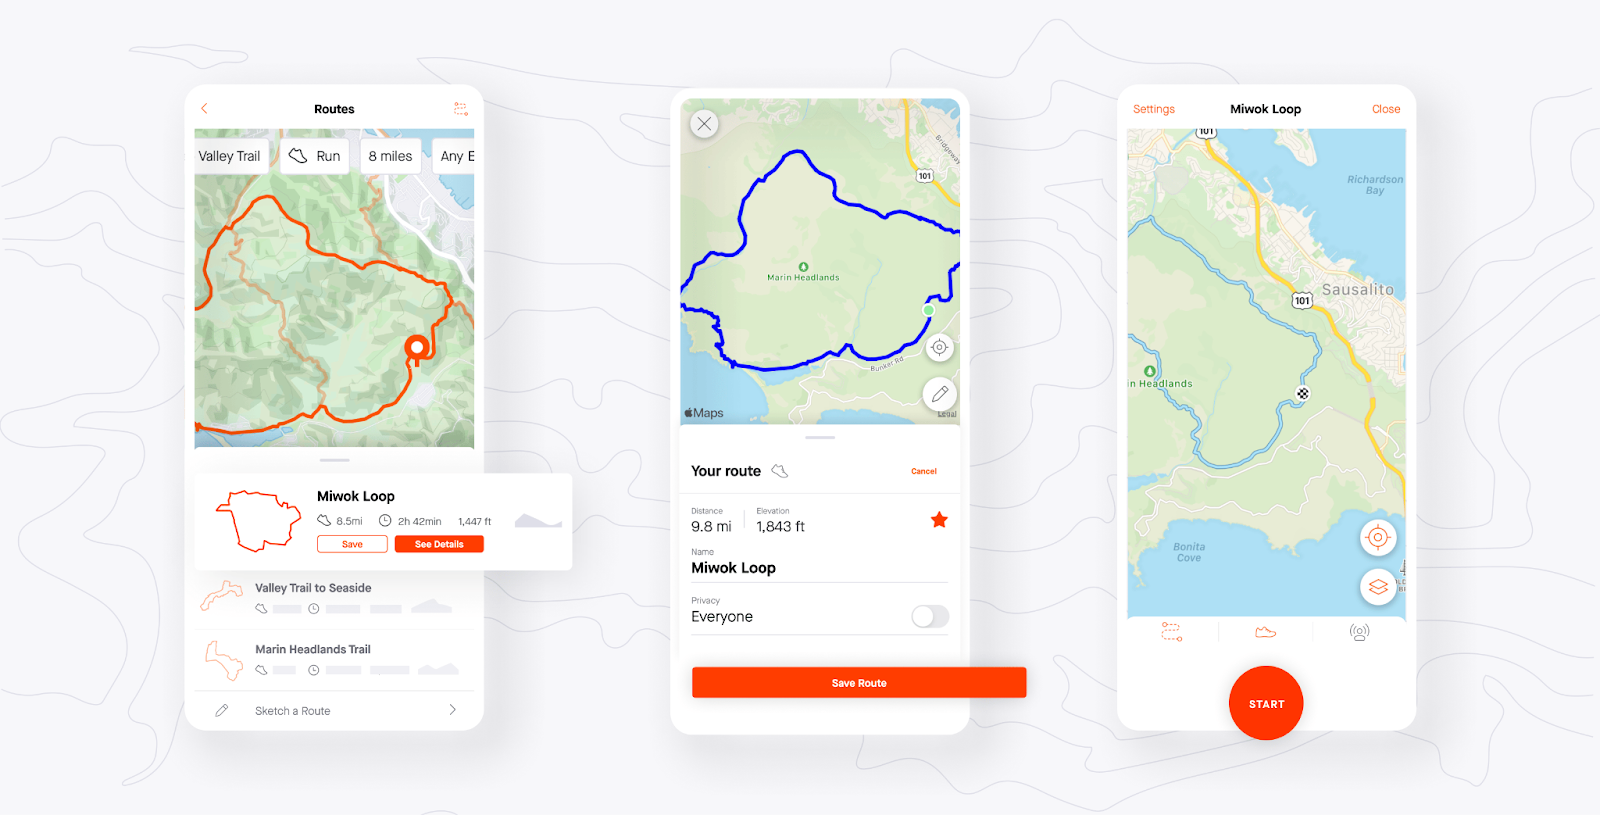 Strava tracks your running, cycling and hiking activities